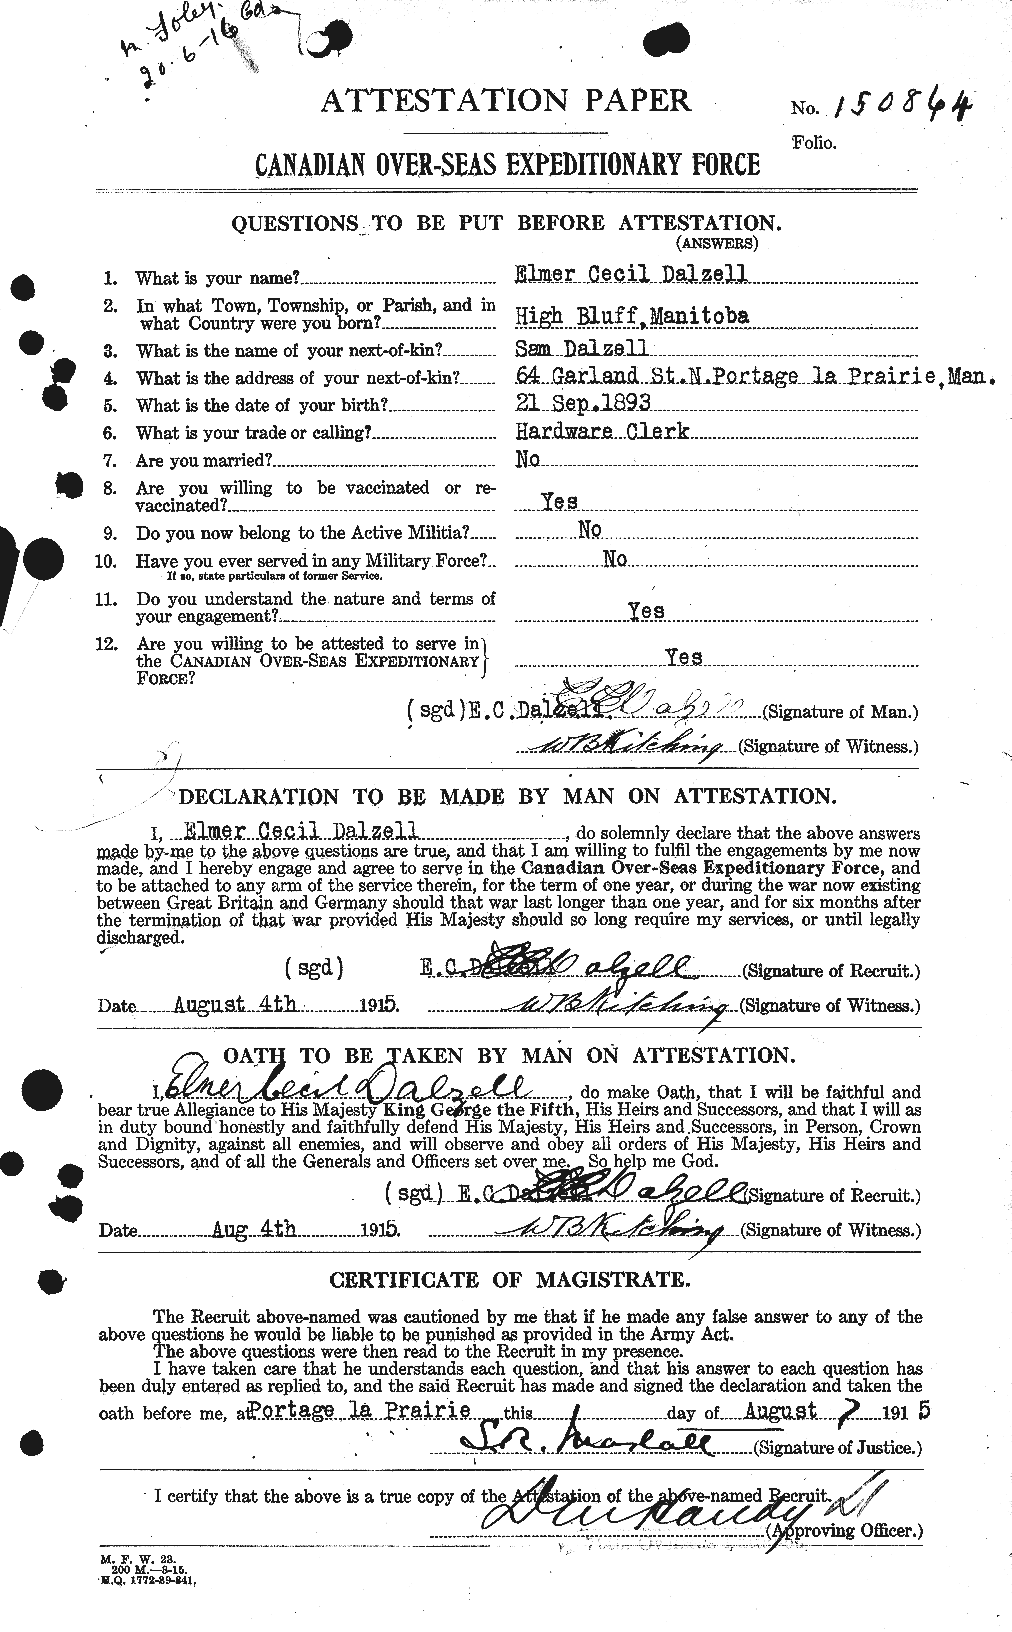 Personnel Records of the First World War - CEF 276437a